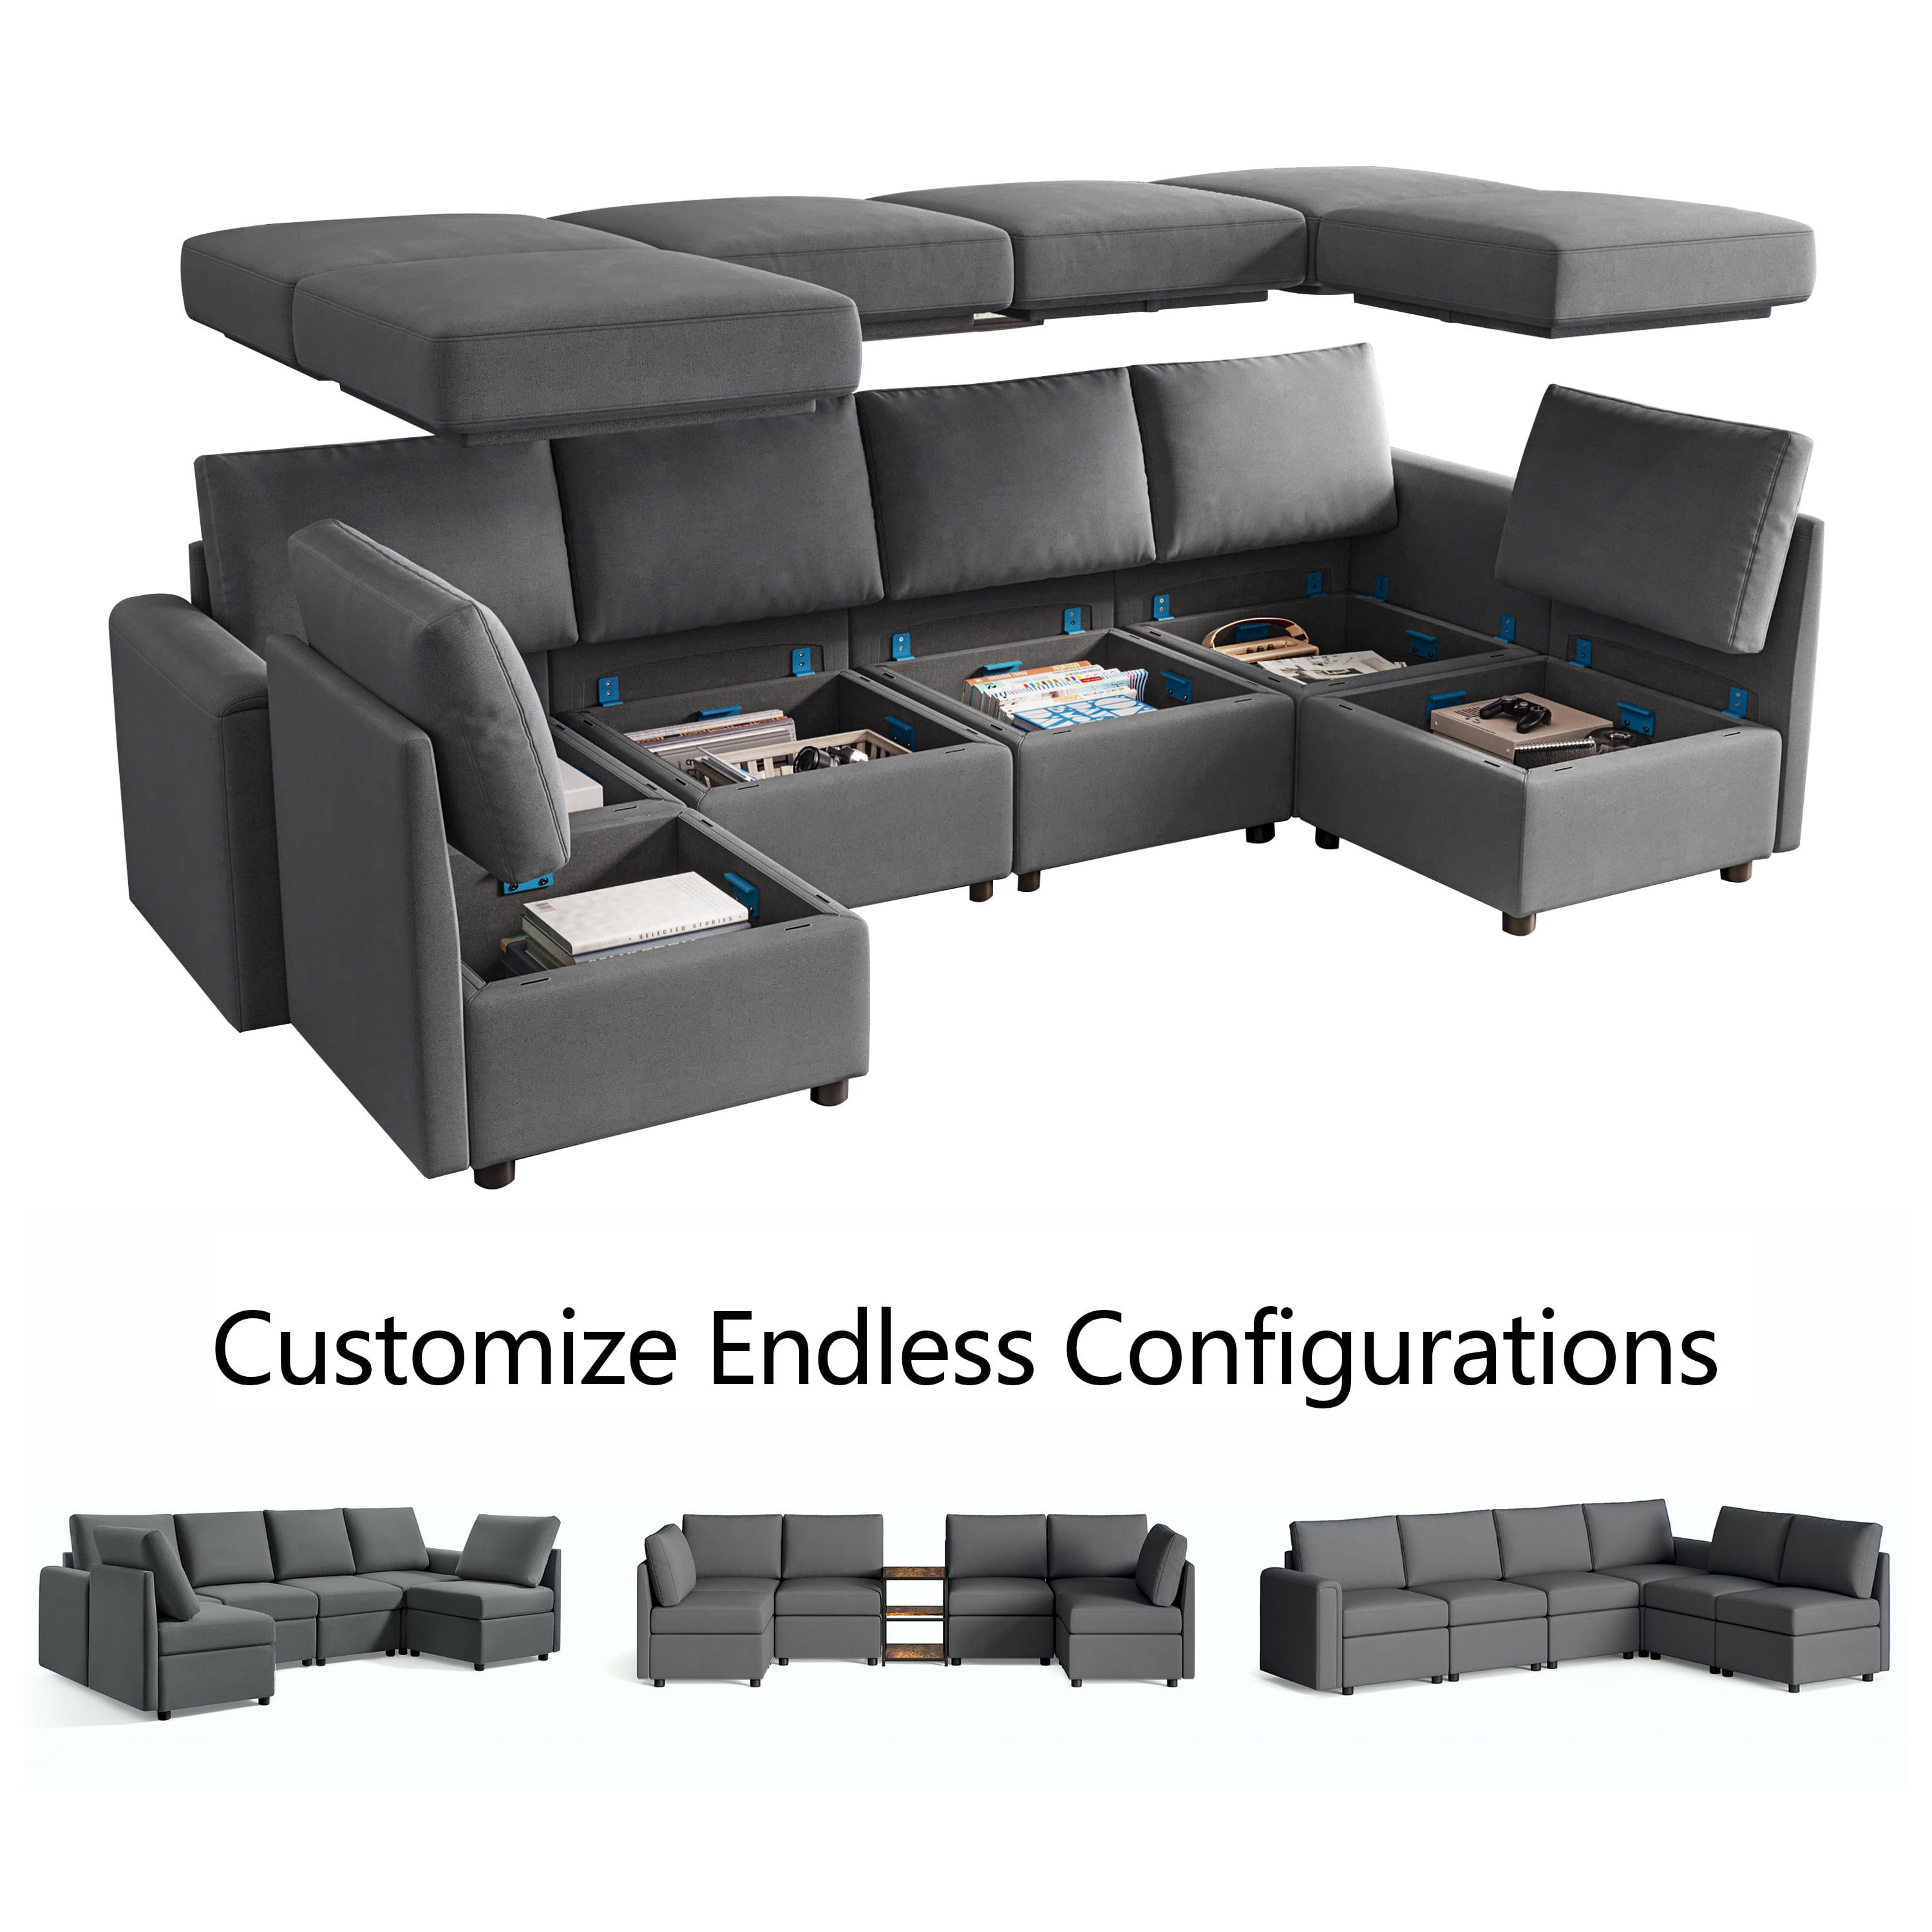 Linsy Home Modular Couches And Sofas Sectional With Storage Sectional Sofa  U Shaped Sectional Couch With Reversible Chaises, Dark Gray – Walmart With Sectional Sofa With Storage (View 10 of 15)